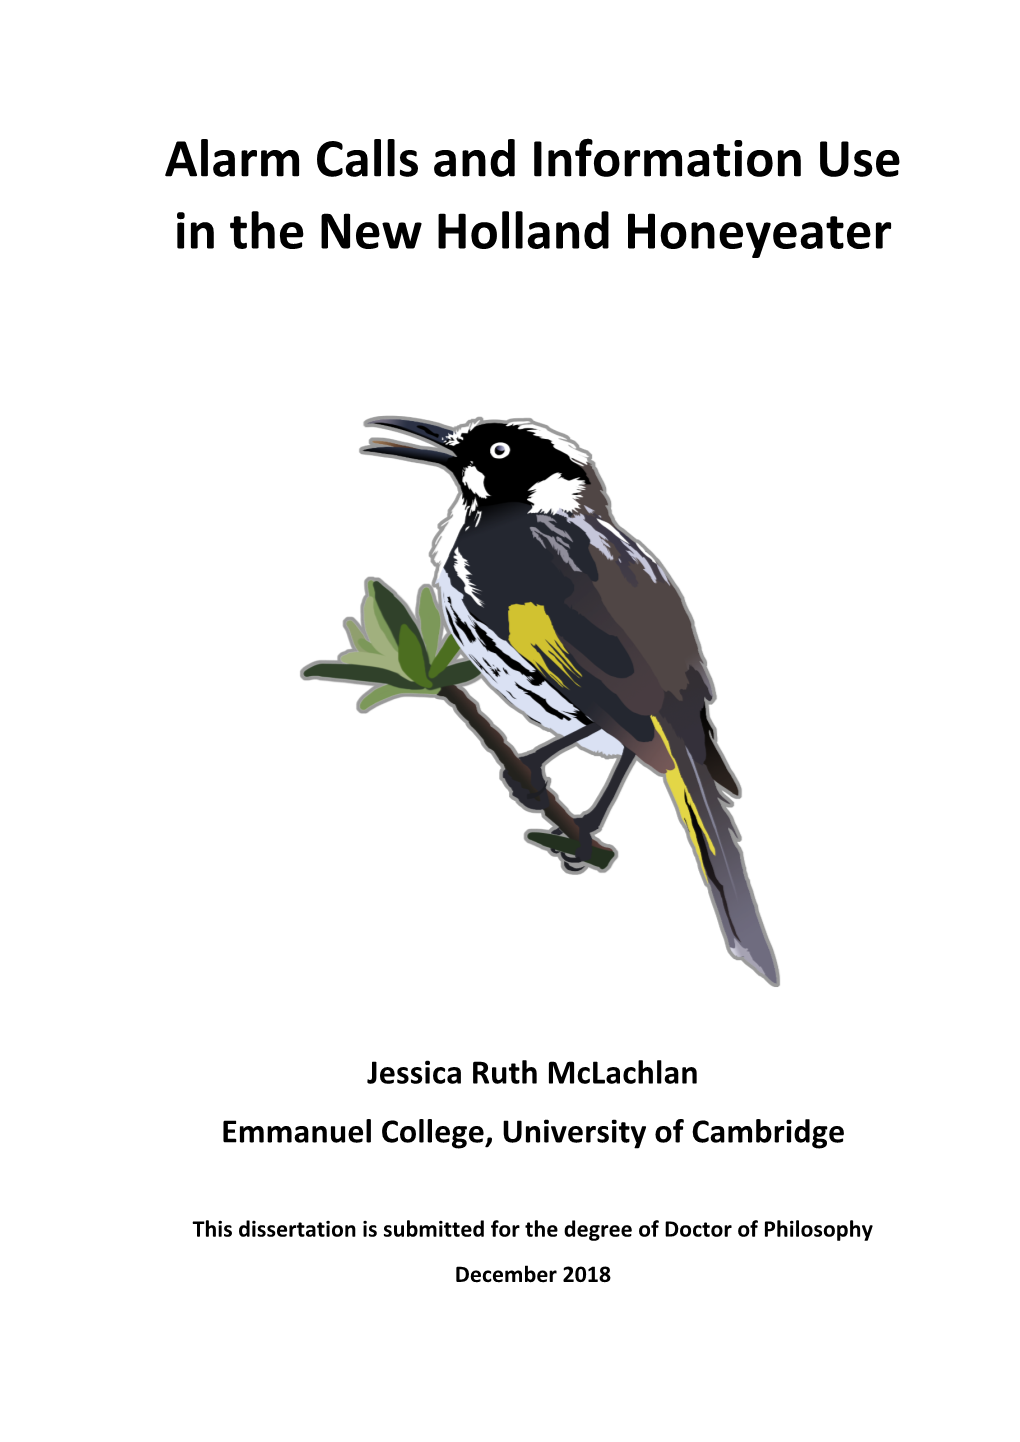 Alarm Calls and Information Use in the New Holland Honeyeater